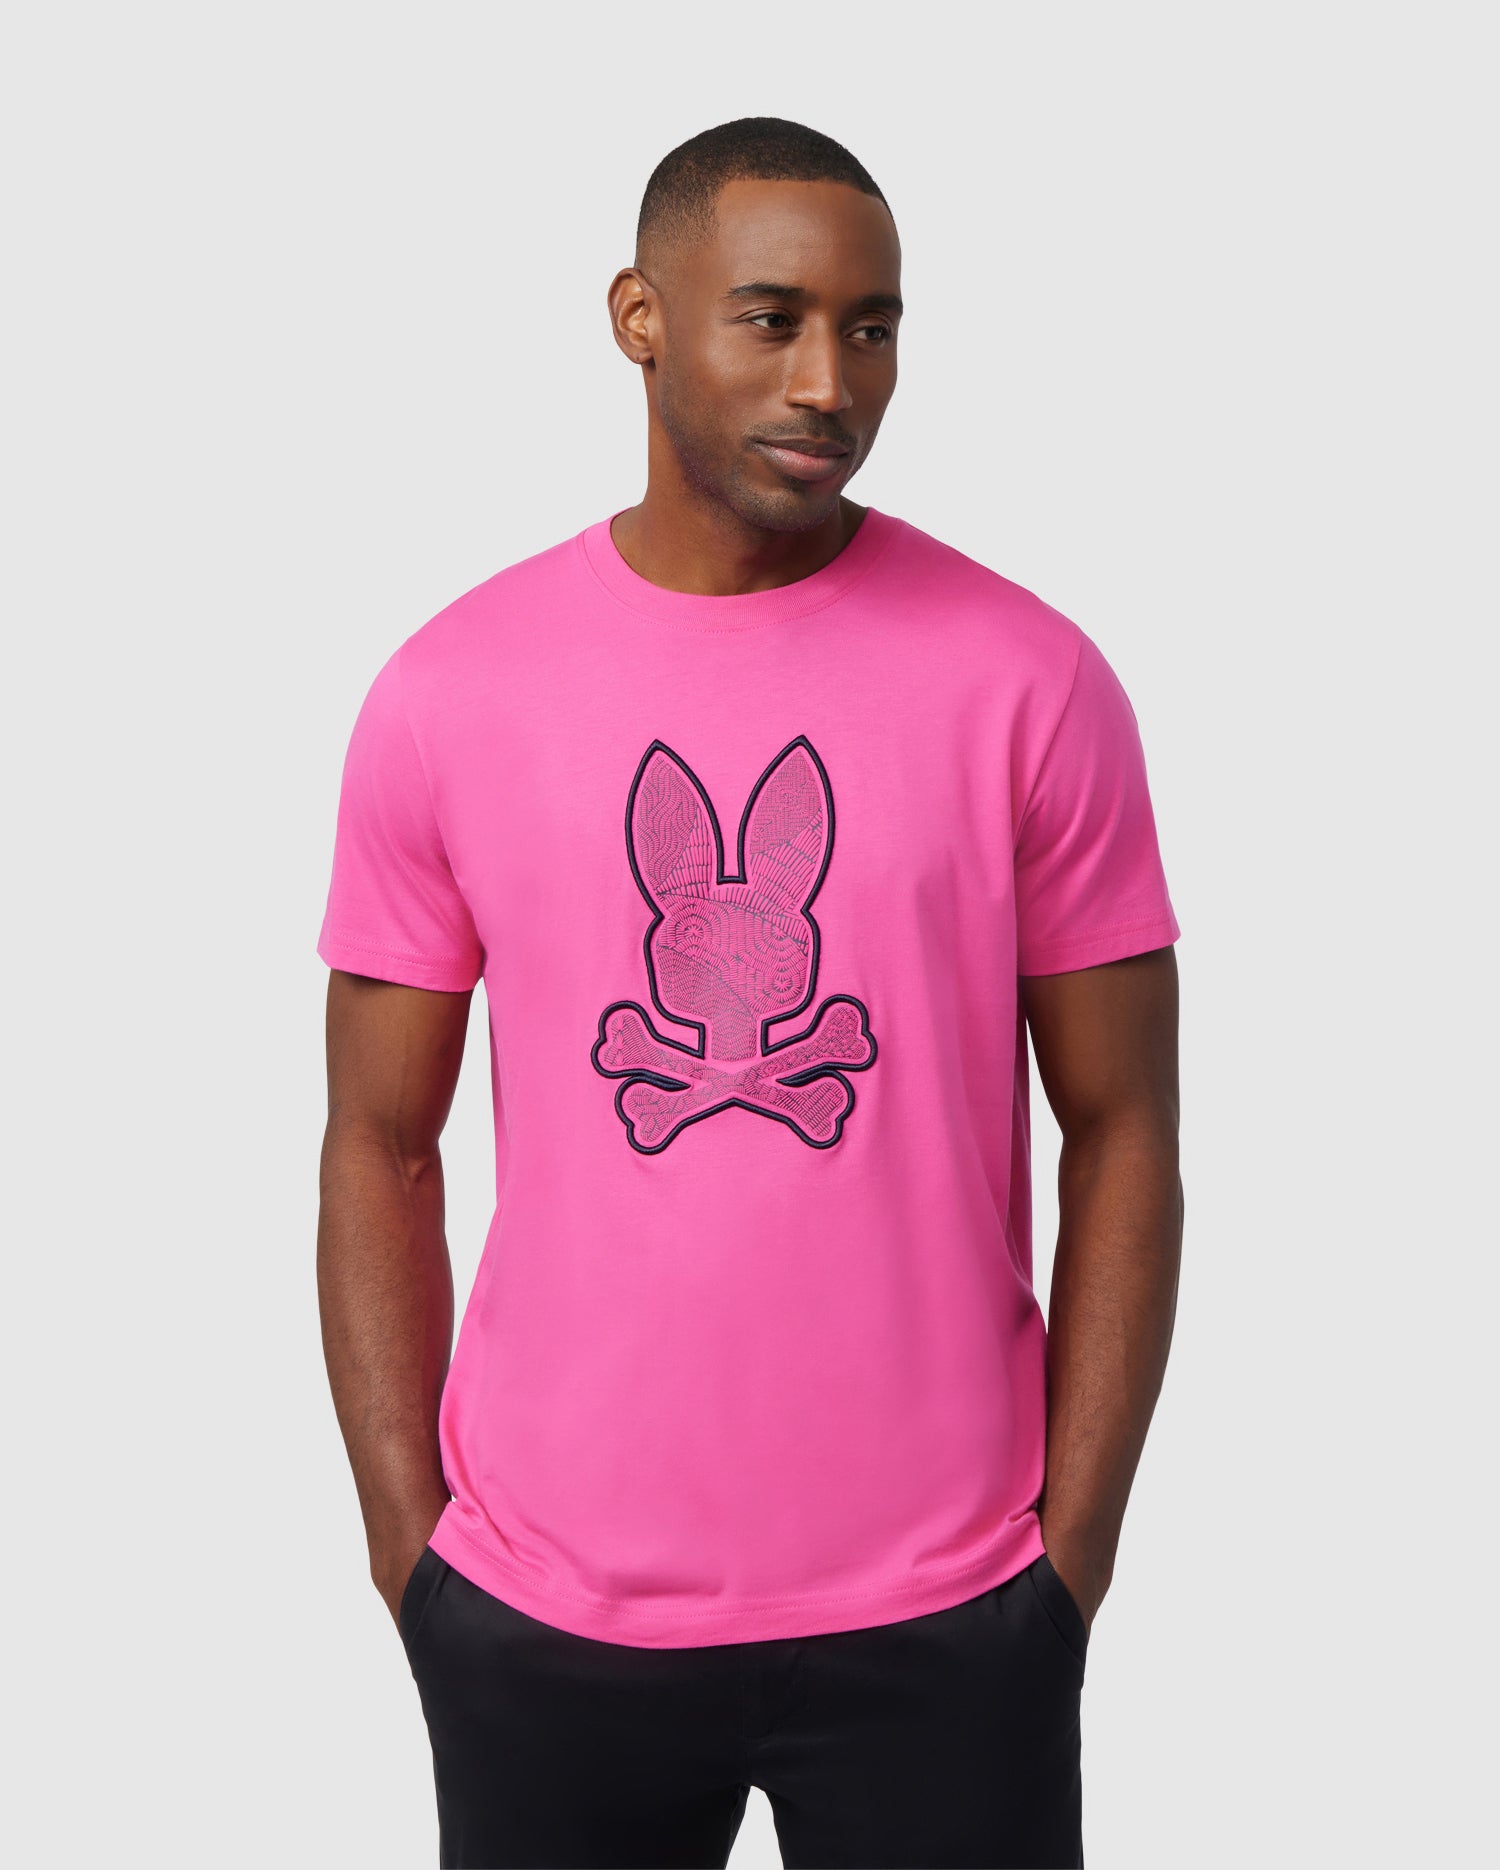 Buy Psycho Bunny Lamport Graphic Tee Shirt at In Style – InStyle